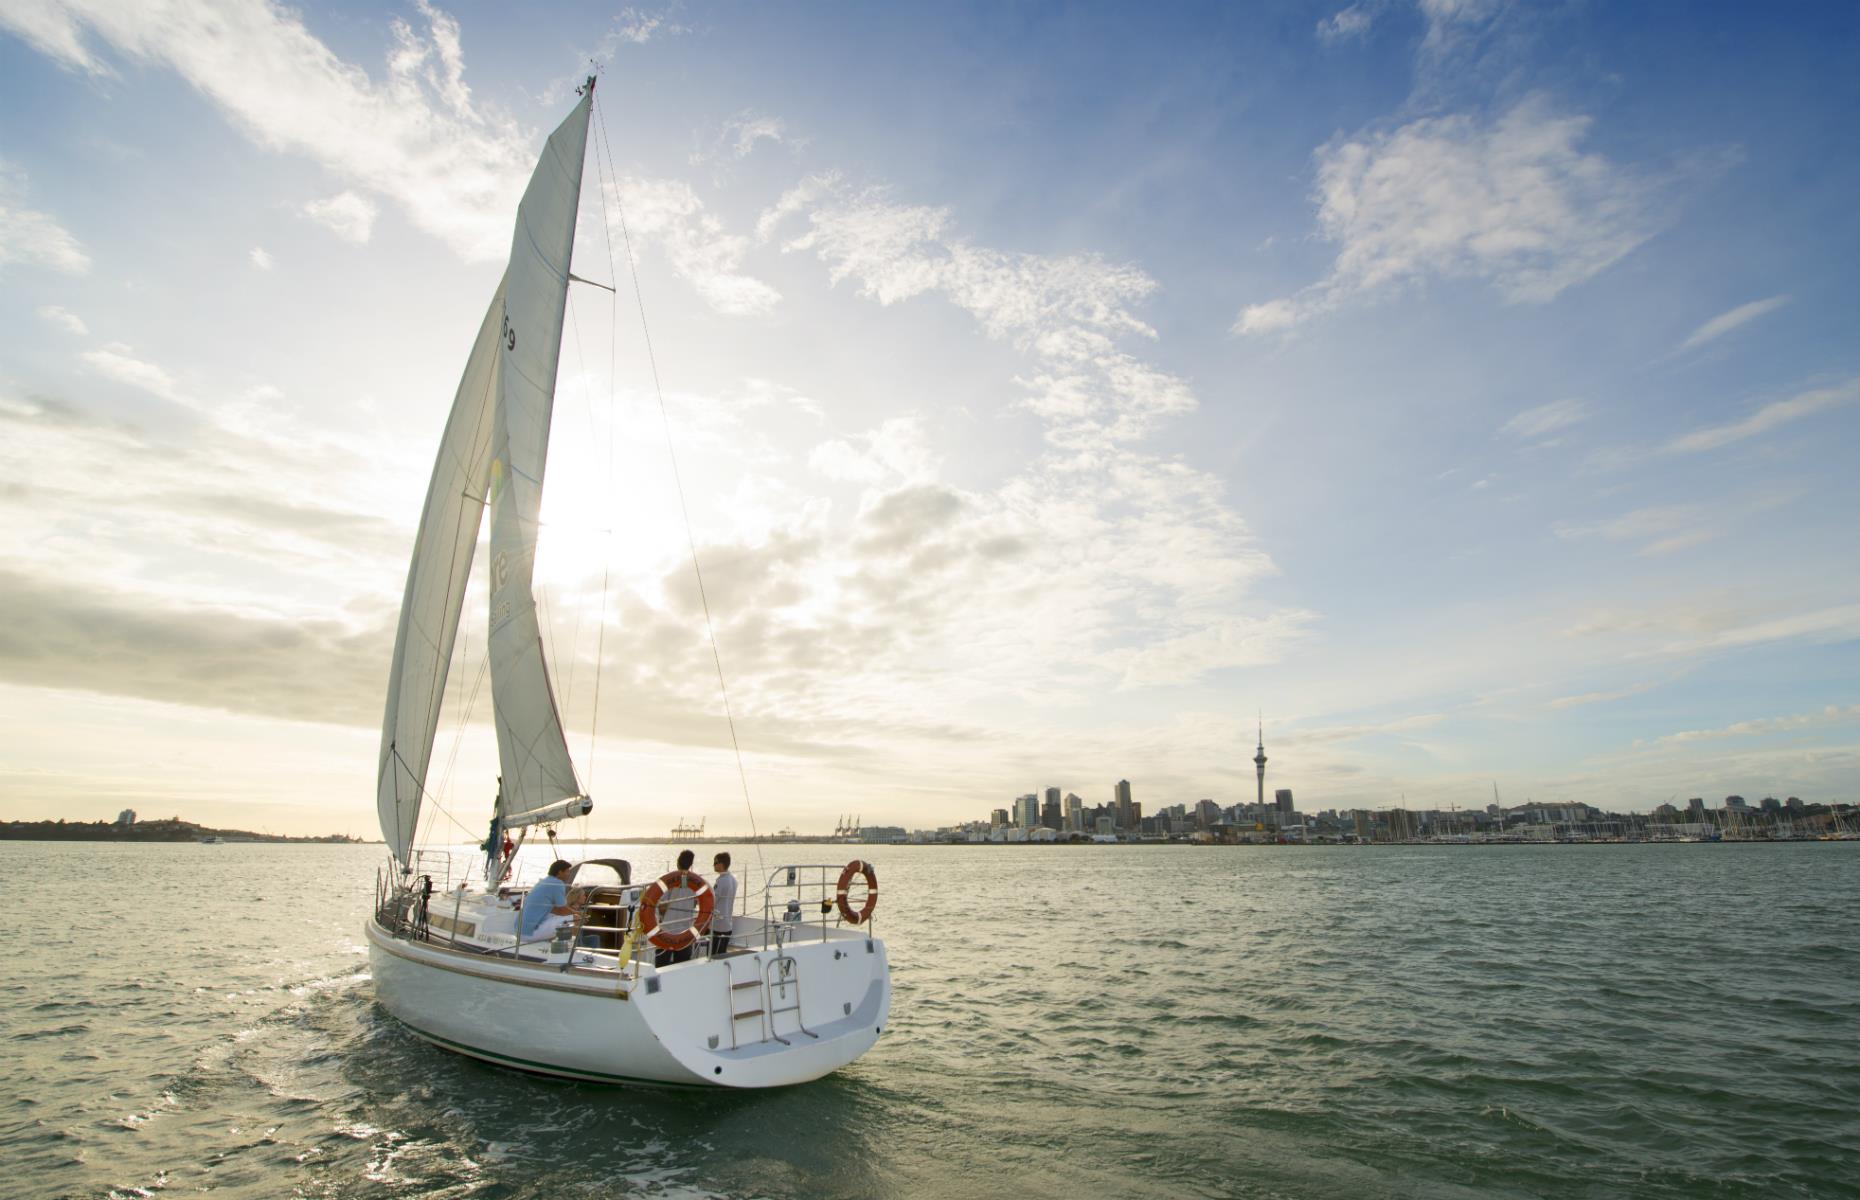 <p>Charter a sailboat or join a cruise to experience Auckland’s Waitematā Harbour from the water. The City of Sails, as it's also known, has a rich maritime heritage and when you’ve learned all you can about Polynesian and European history in its museums, nothing beats seeing Auckland’s skyline with the wind in your hair. There's even an option to book an ex-<a href="https://www.exploregroup.co.nz/auckland/americas-cup-sailing-experience/">America's Cup sailing yacht</a>.</p>